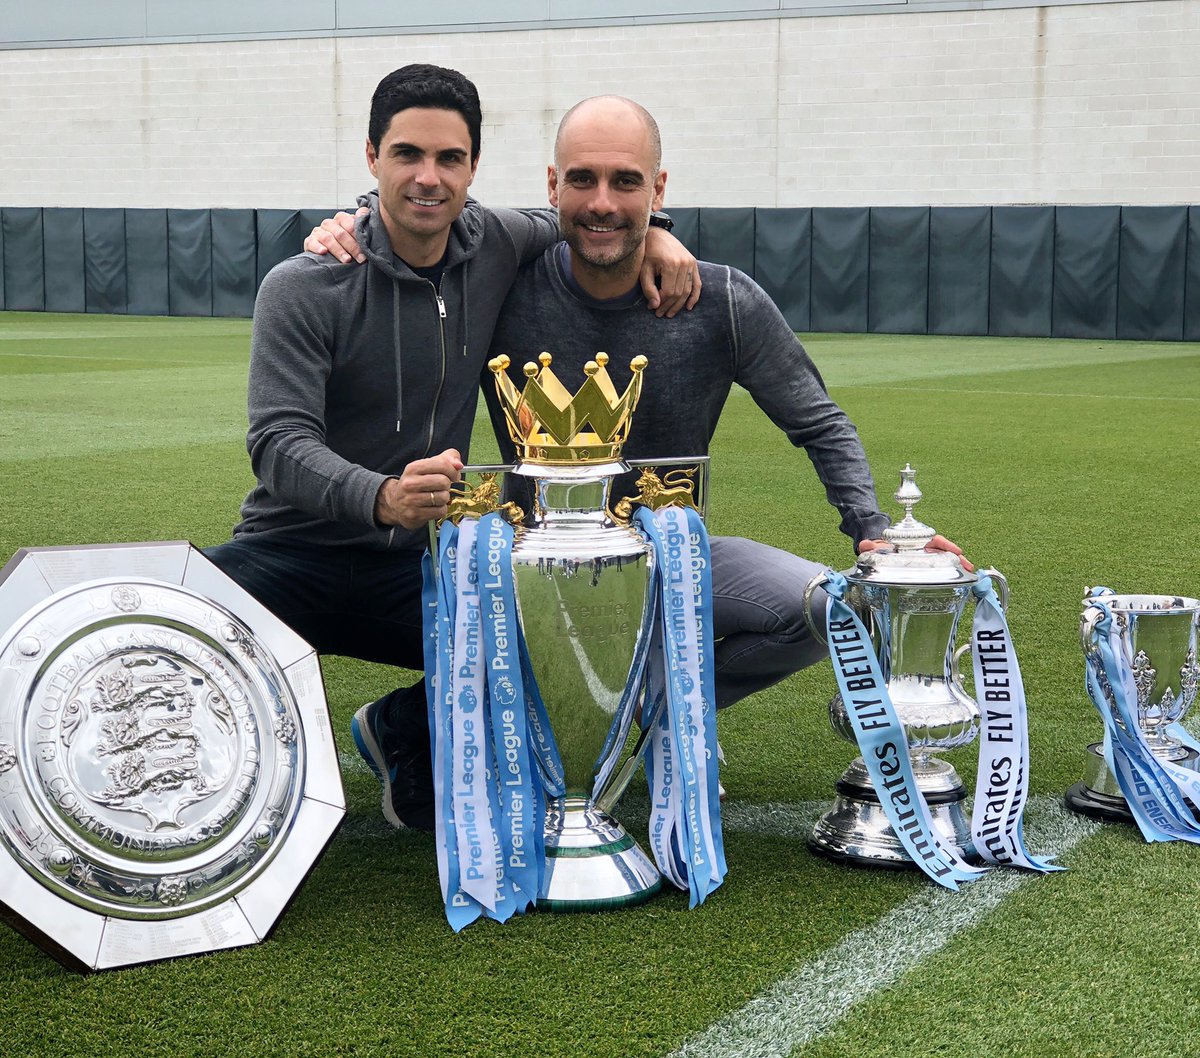 In 2018/19, Pep won the first ever English domestic treble, and became the first Manchester City manager to win multiple league titlesA combined 198 points in the 2018/19 season and the previous one